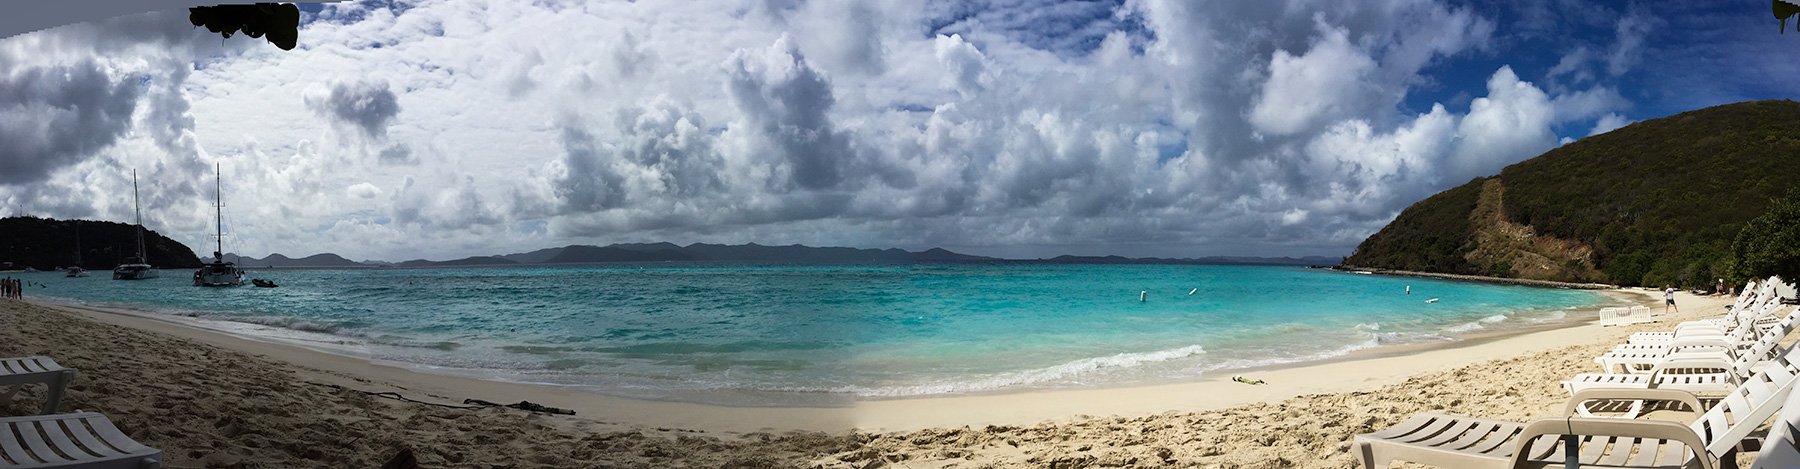 White Bay on Jost Van Dyke. During a caribbean cruise on Windstar's Wind Surf ship